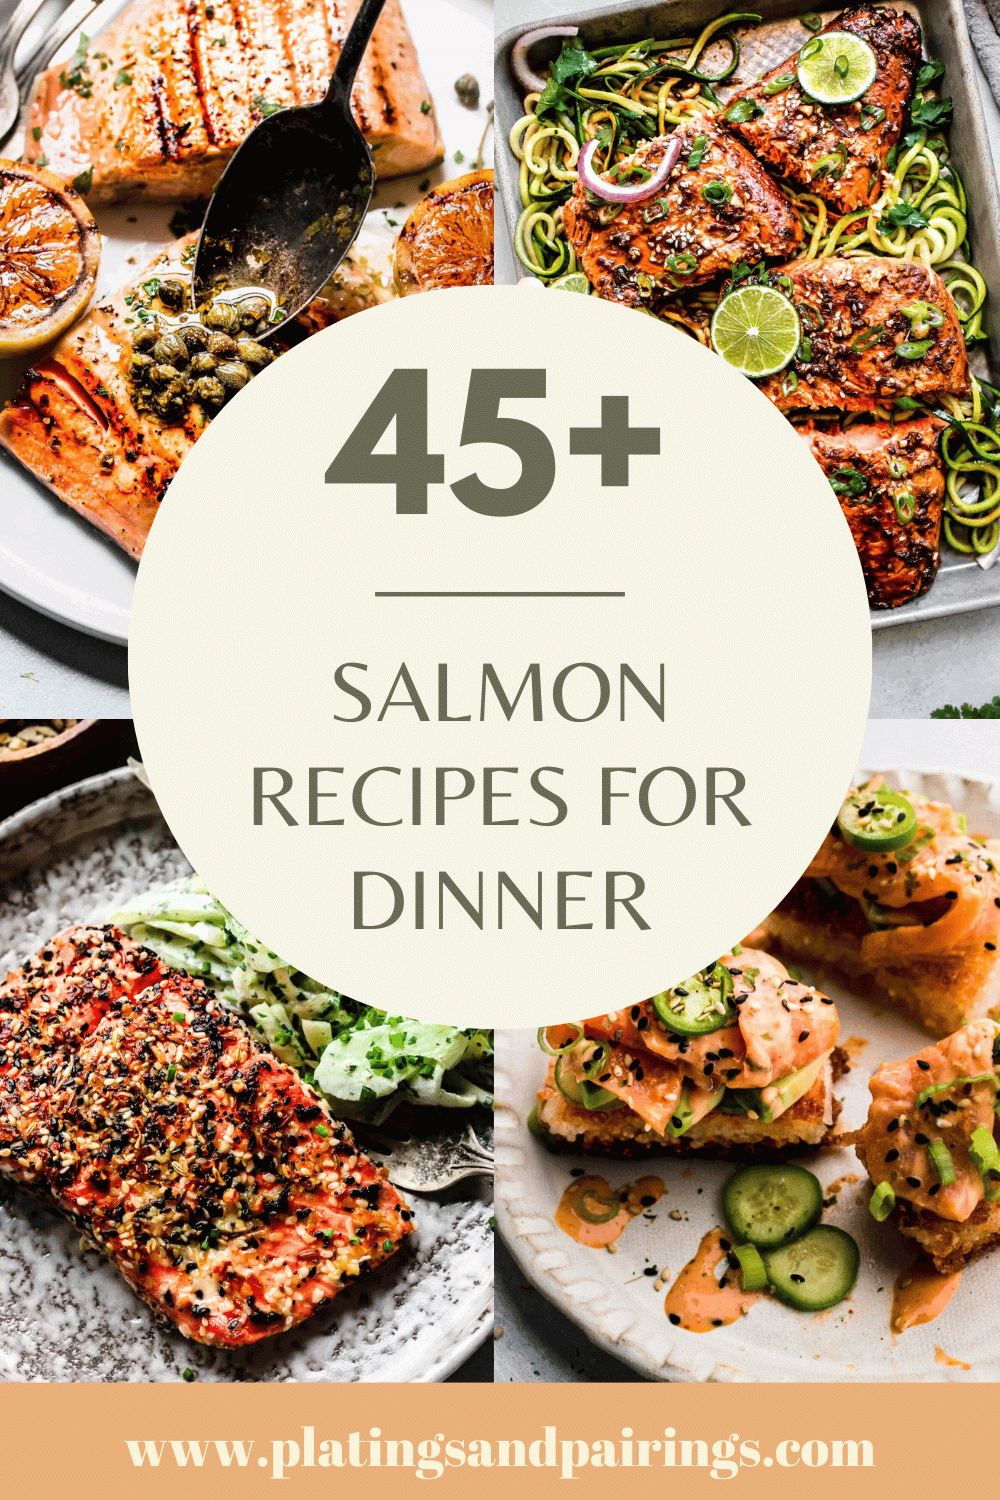 Collage of salmon recipes with text overlay.